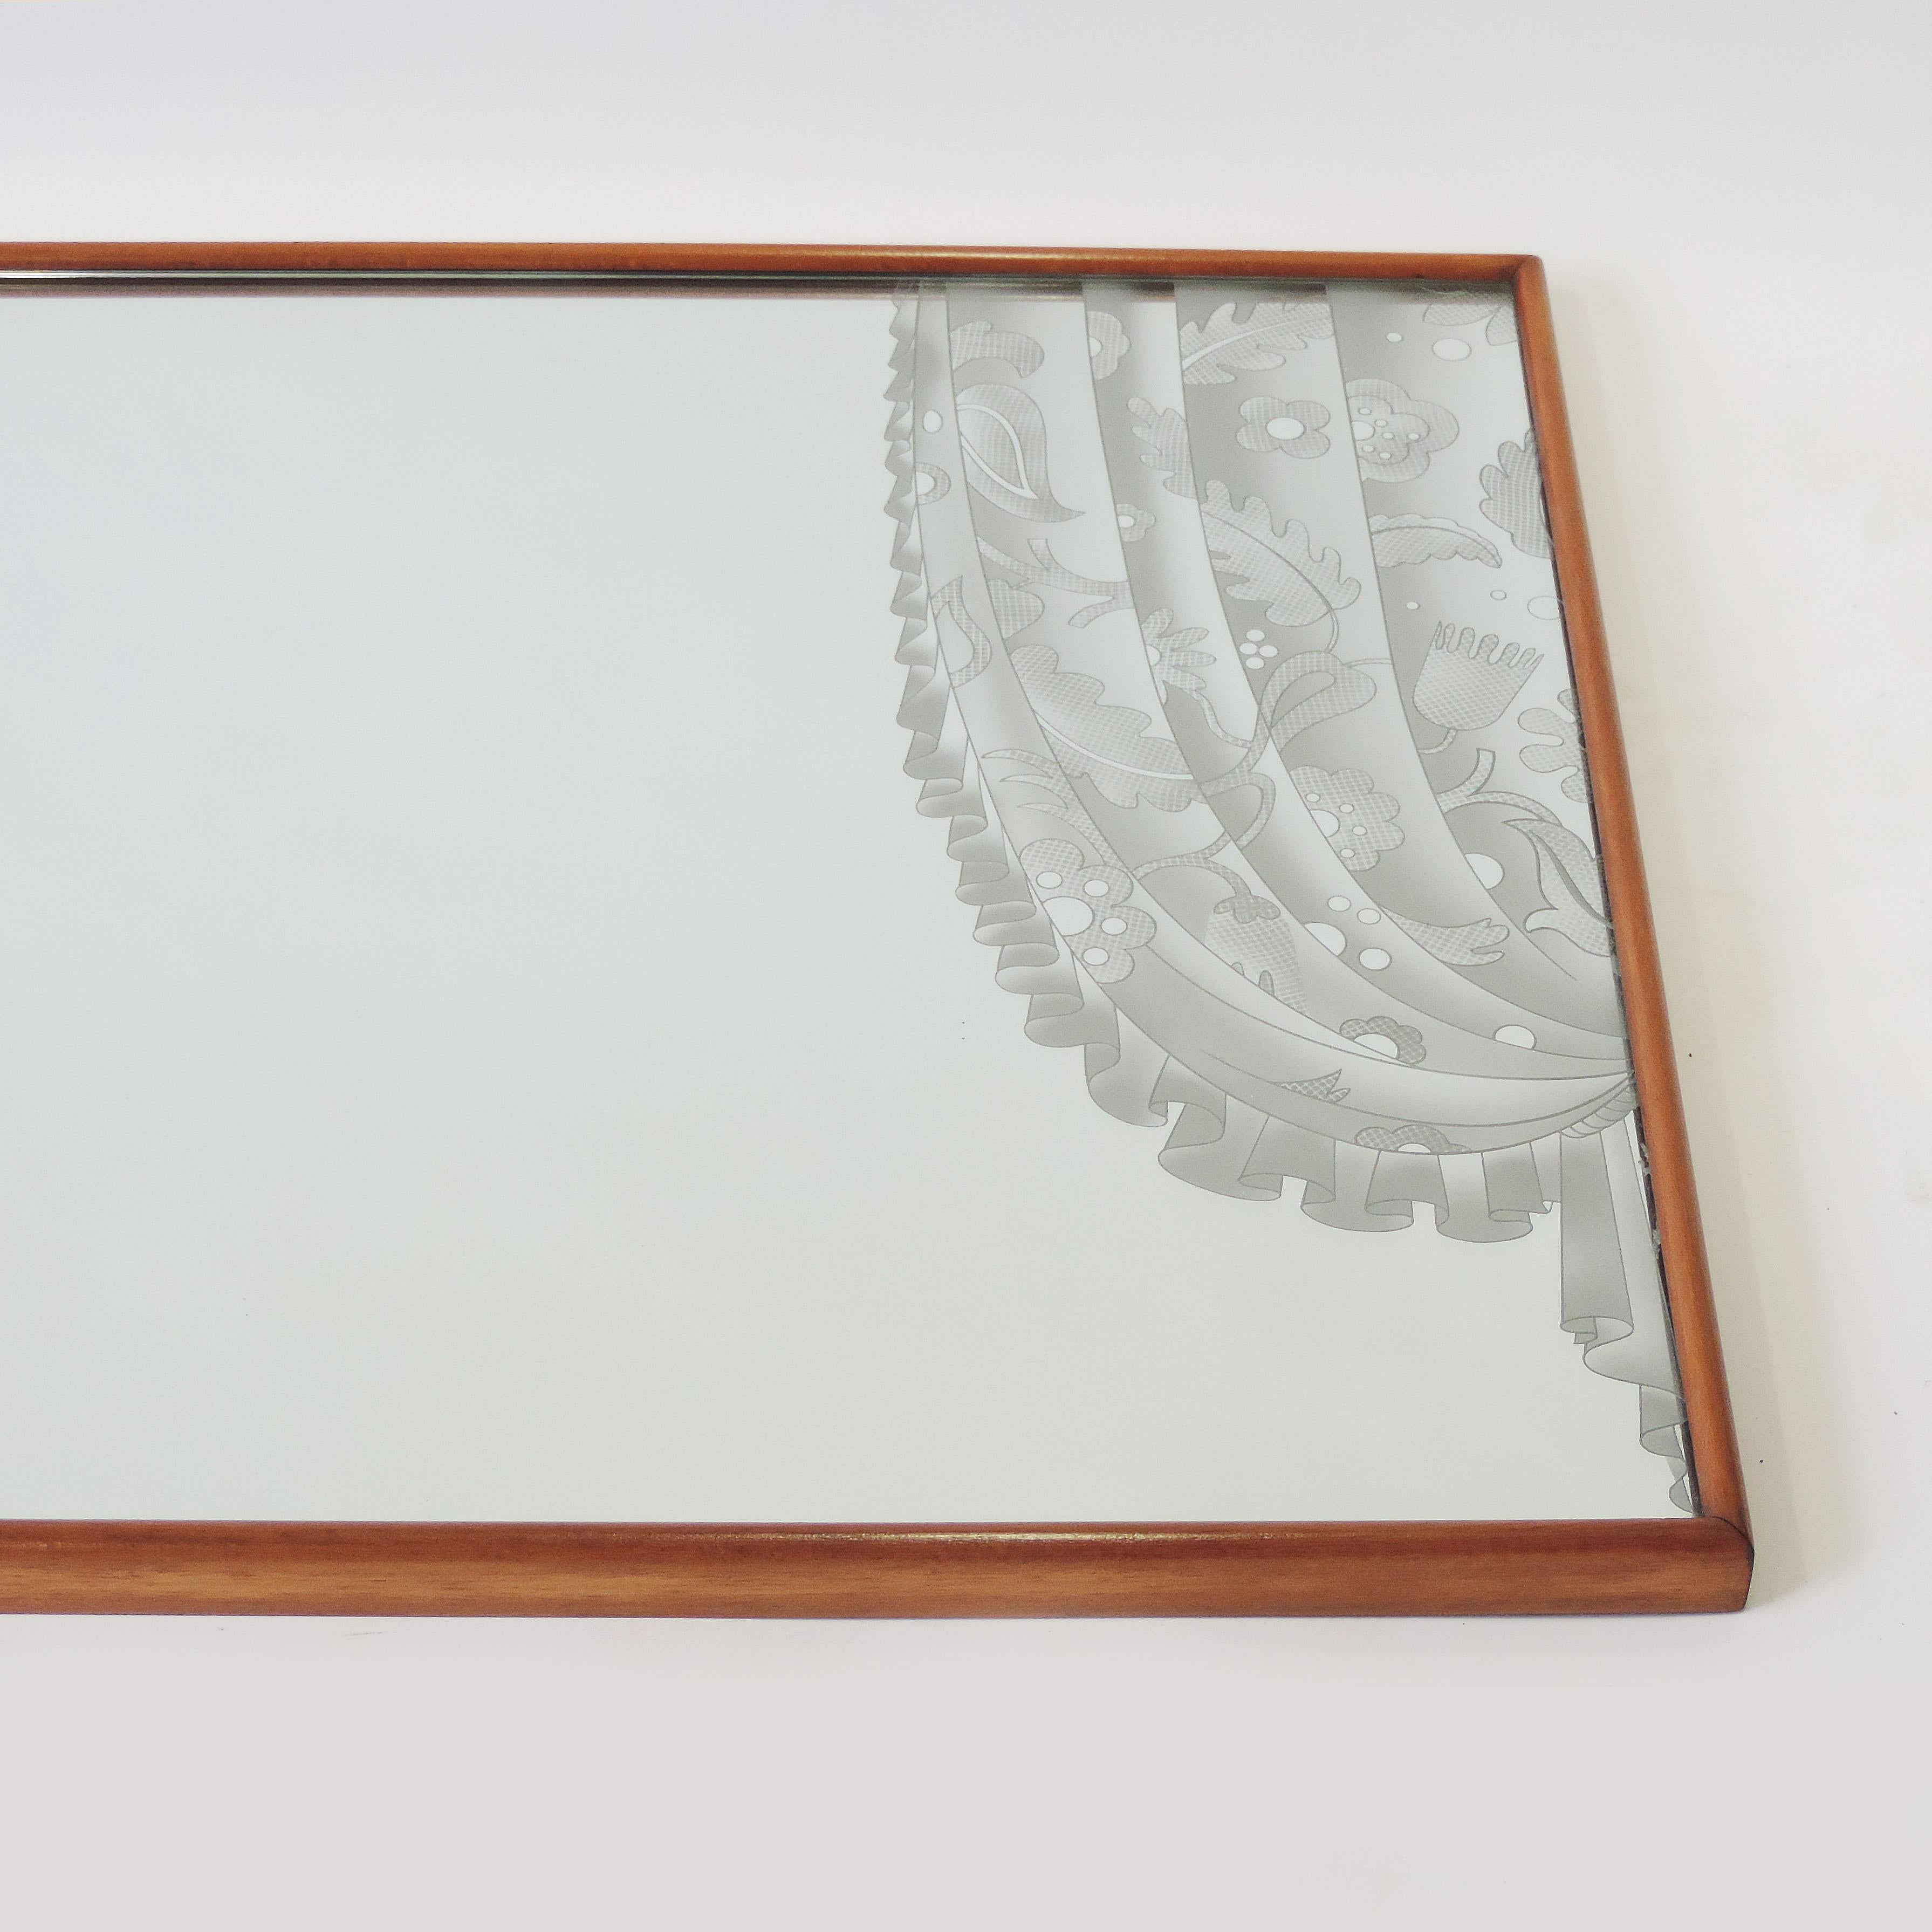 Etched Italian 1940s Curtains Wall Mirror with a Wood Frame by Brusotti